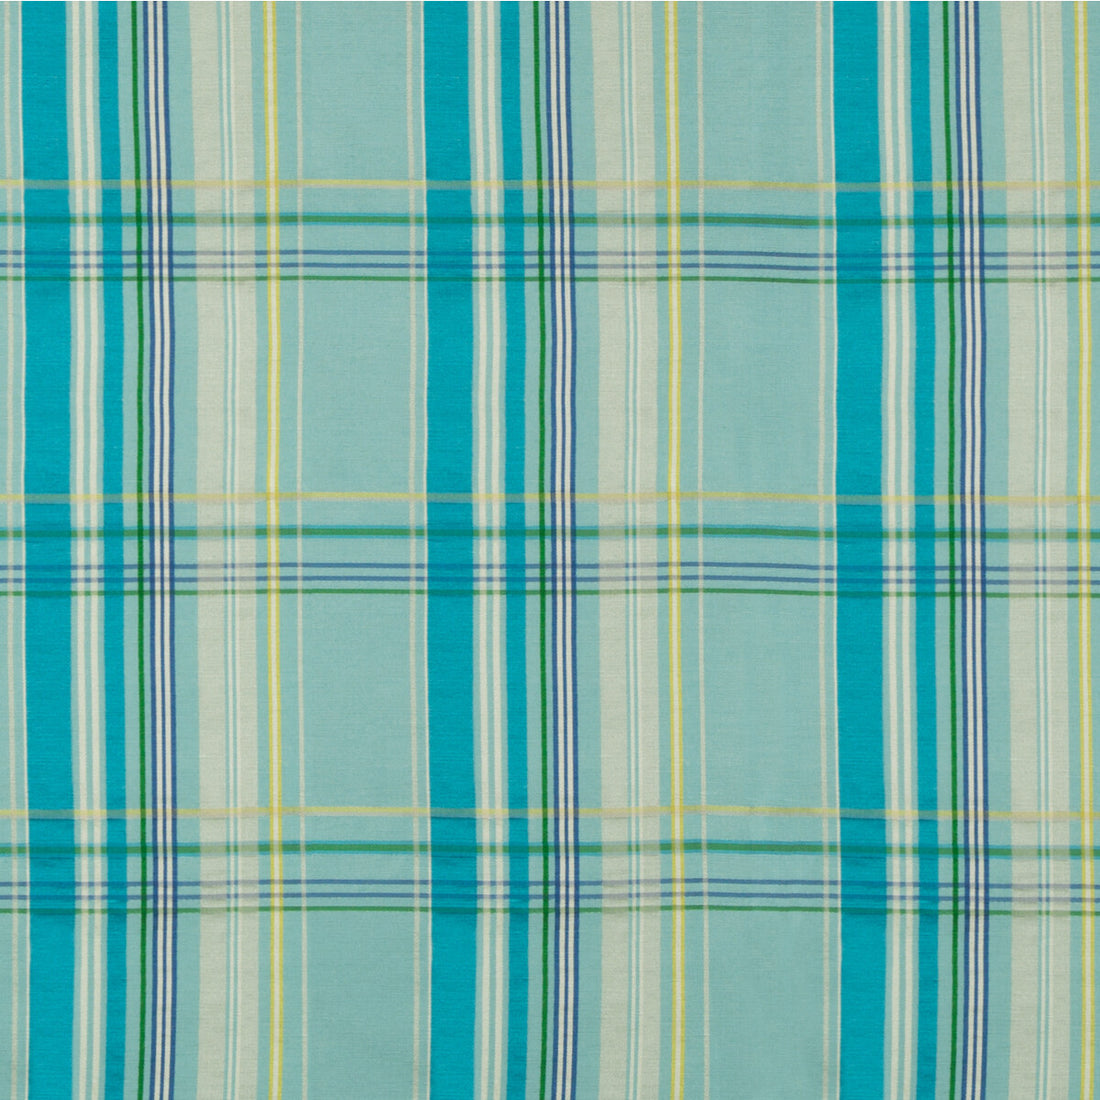 La Comelle Plaid fabric in aqua color - pattern 8018108.13.0 - by Brunschwig &amp; Fils in the Baret collection